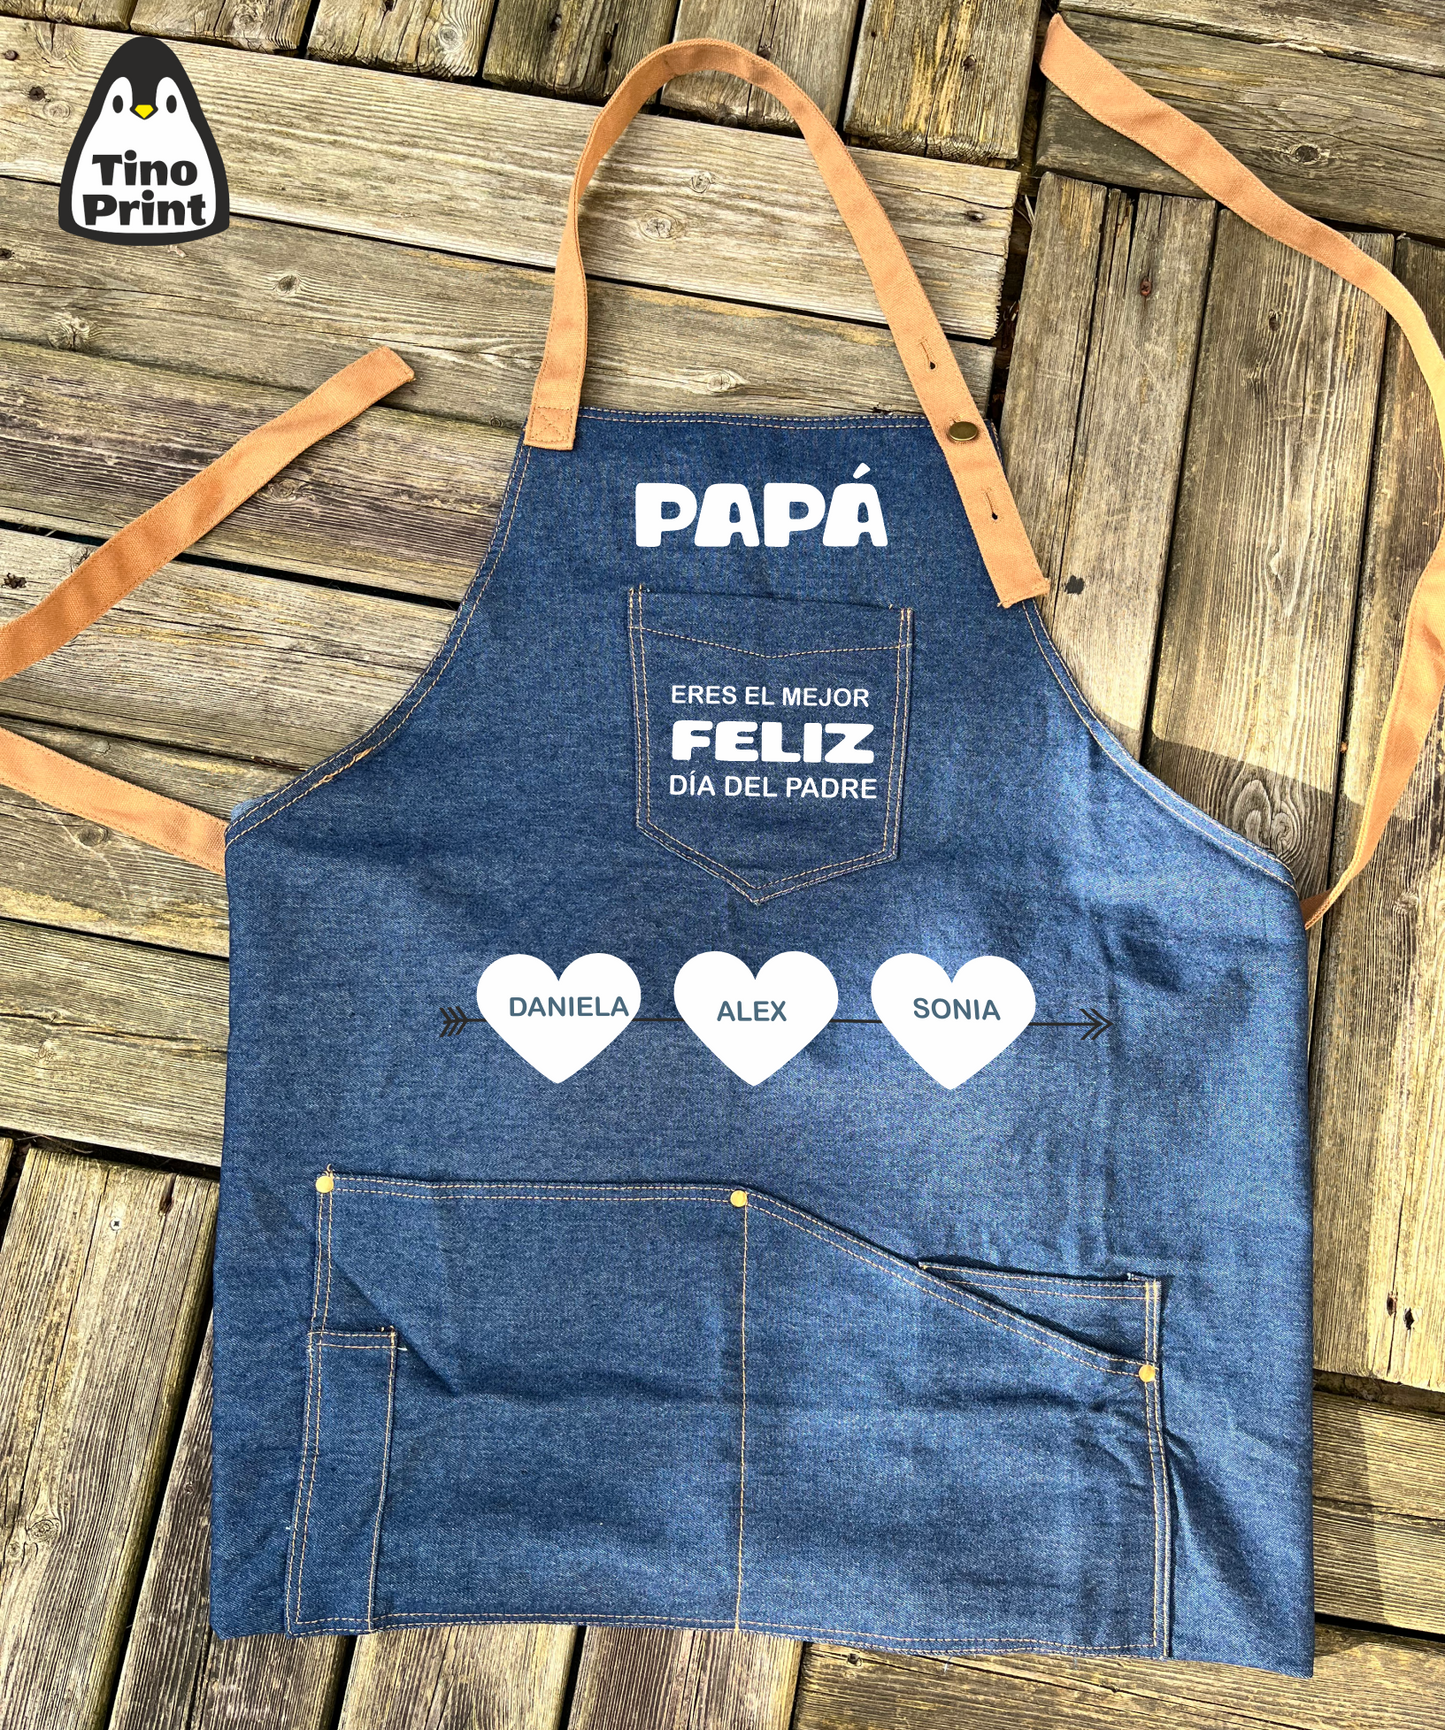 Father's Day Cowboy woven apron.